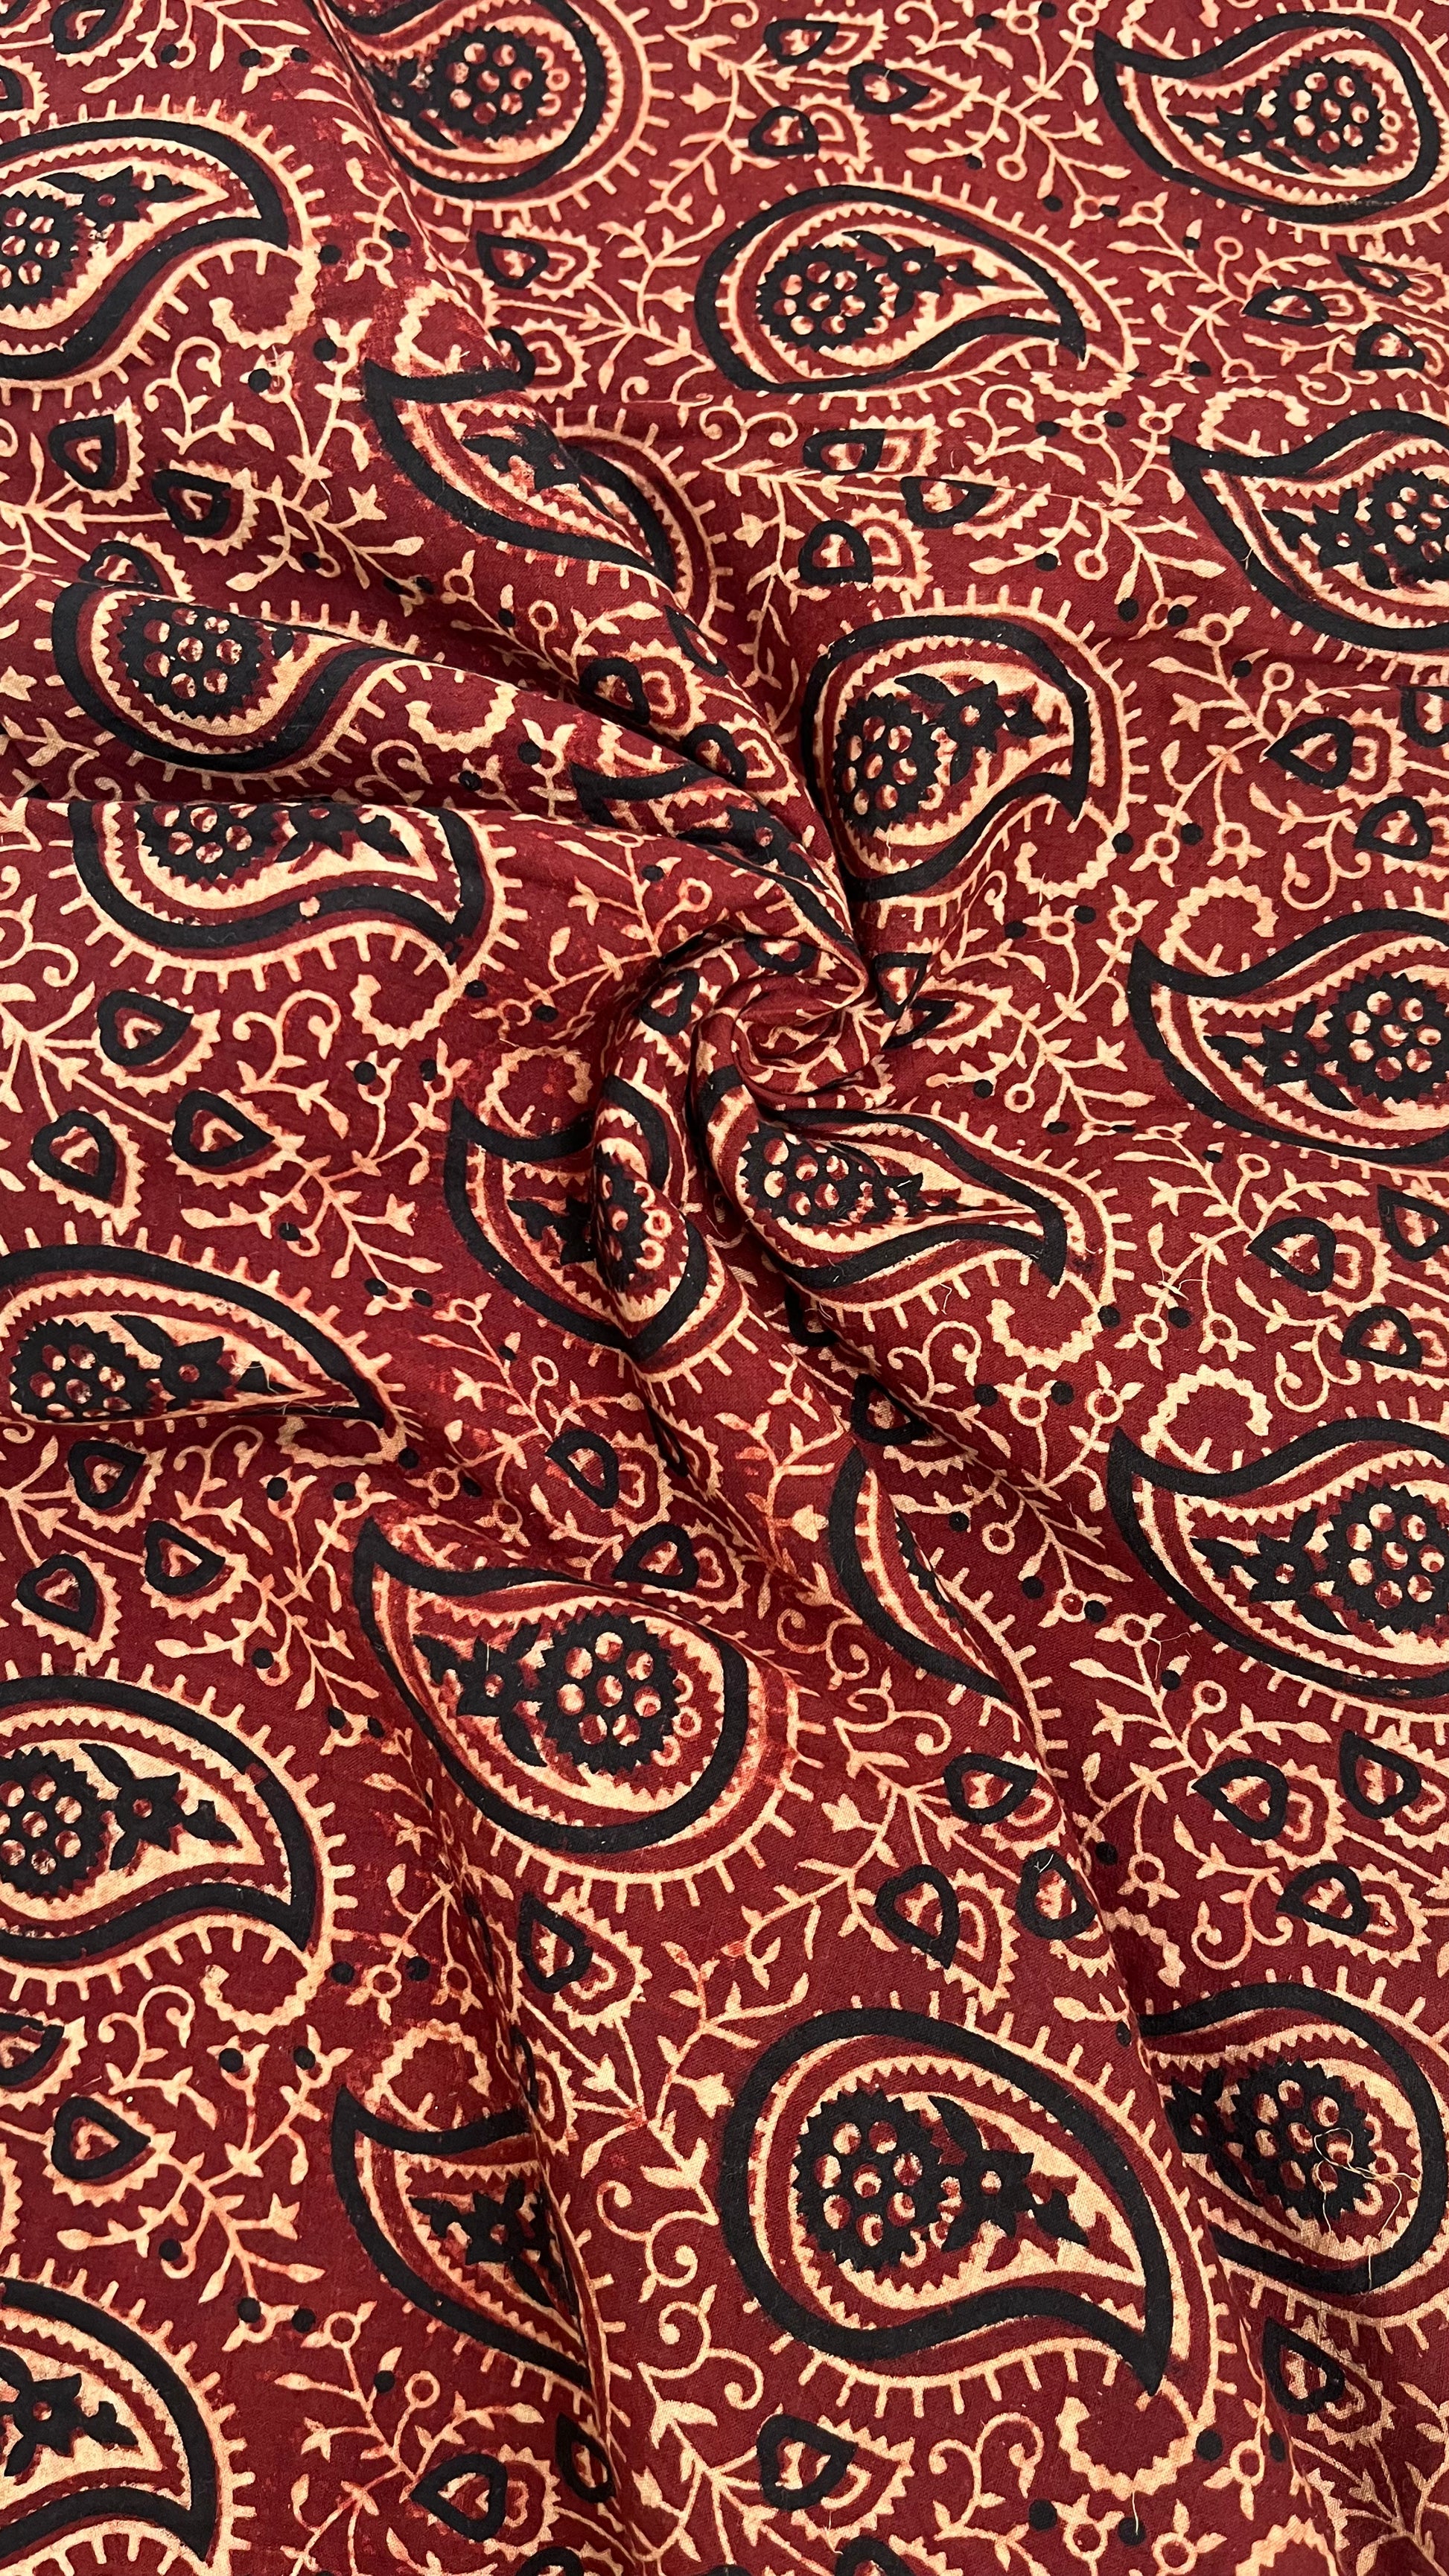 Cotton red paisley print ajrakh fabric, Multicolour at Rs 120